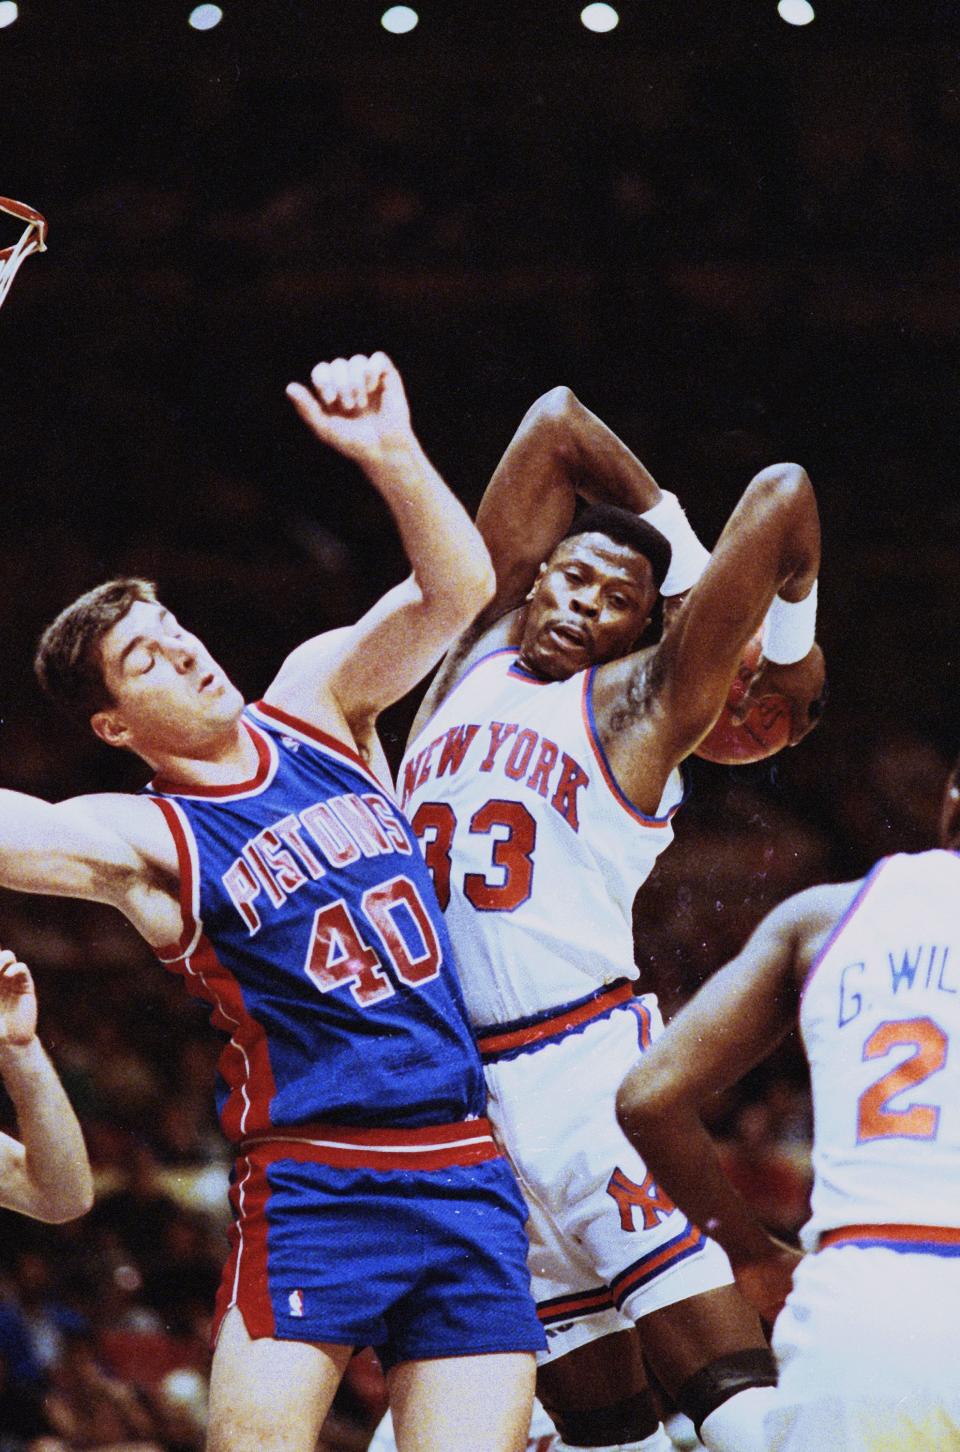 The New York Knicks' Patrick Ewing grabs a rebound away from the Detroit Pistons' Bill Laimbeer in the first period of the playoff game at Madison Square Garden, May 12, 1990.